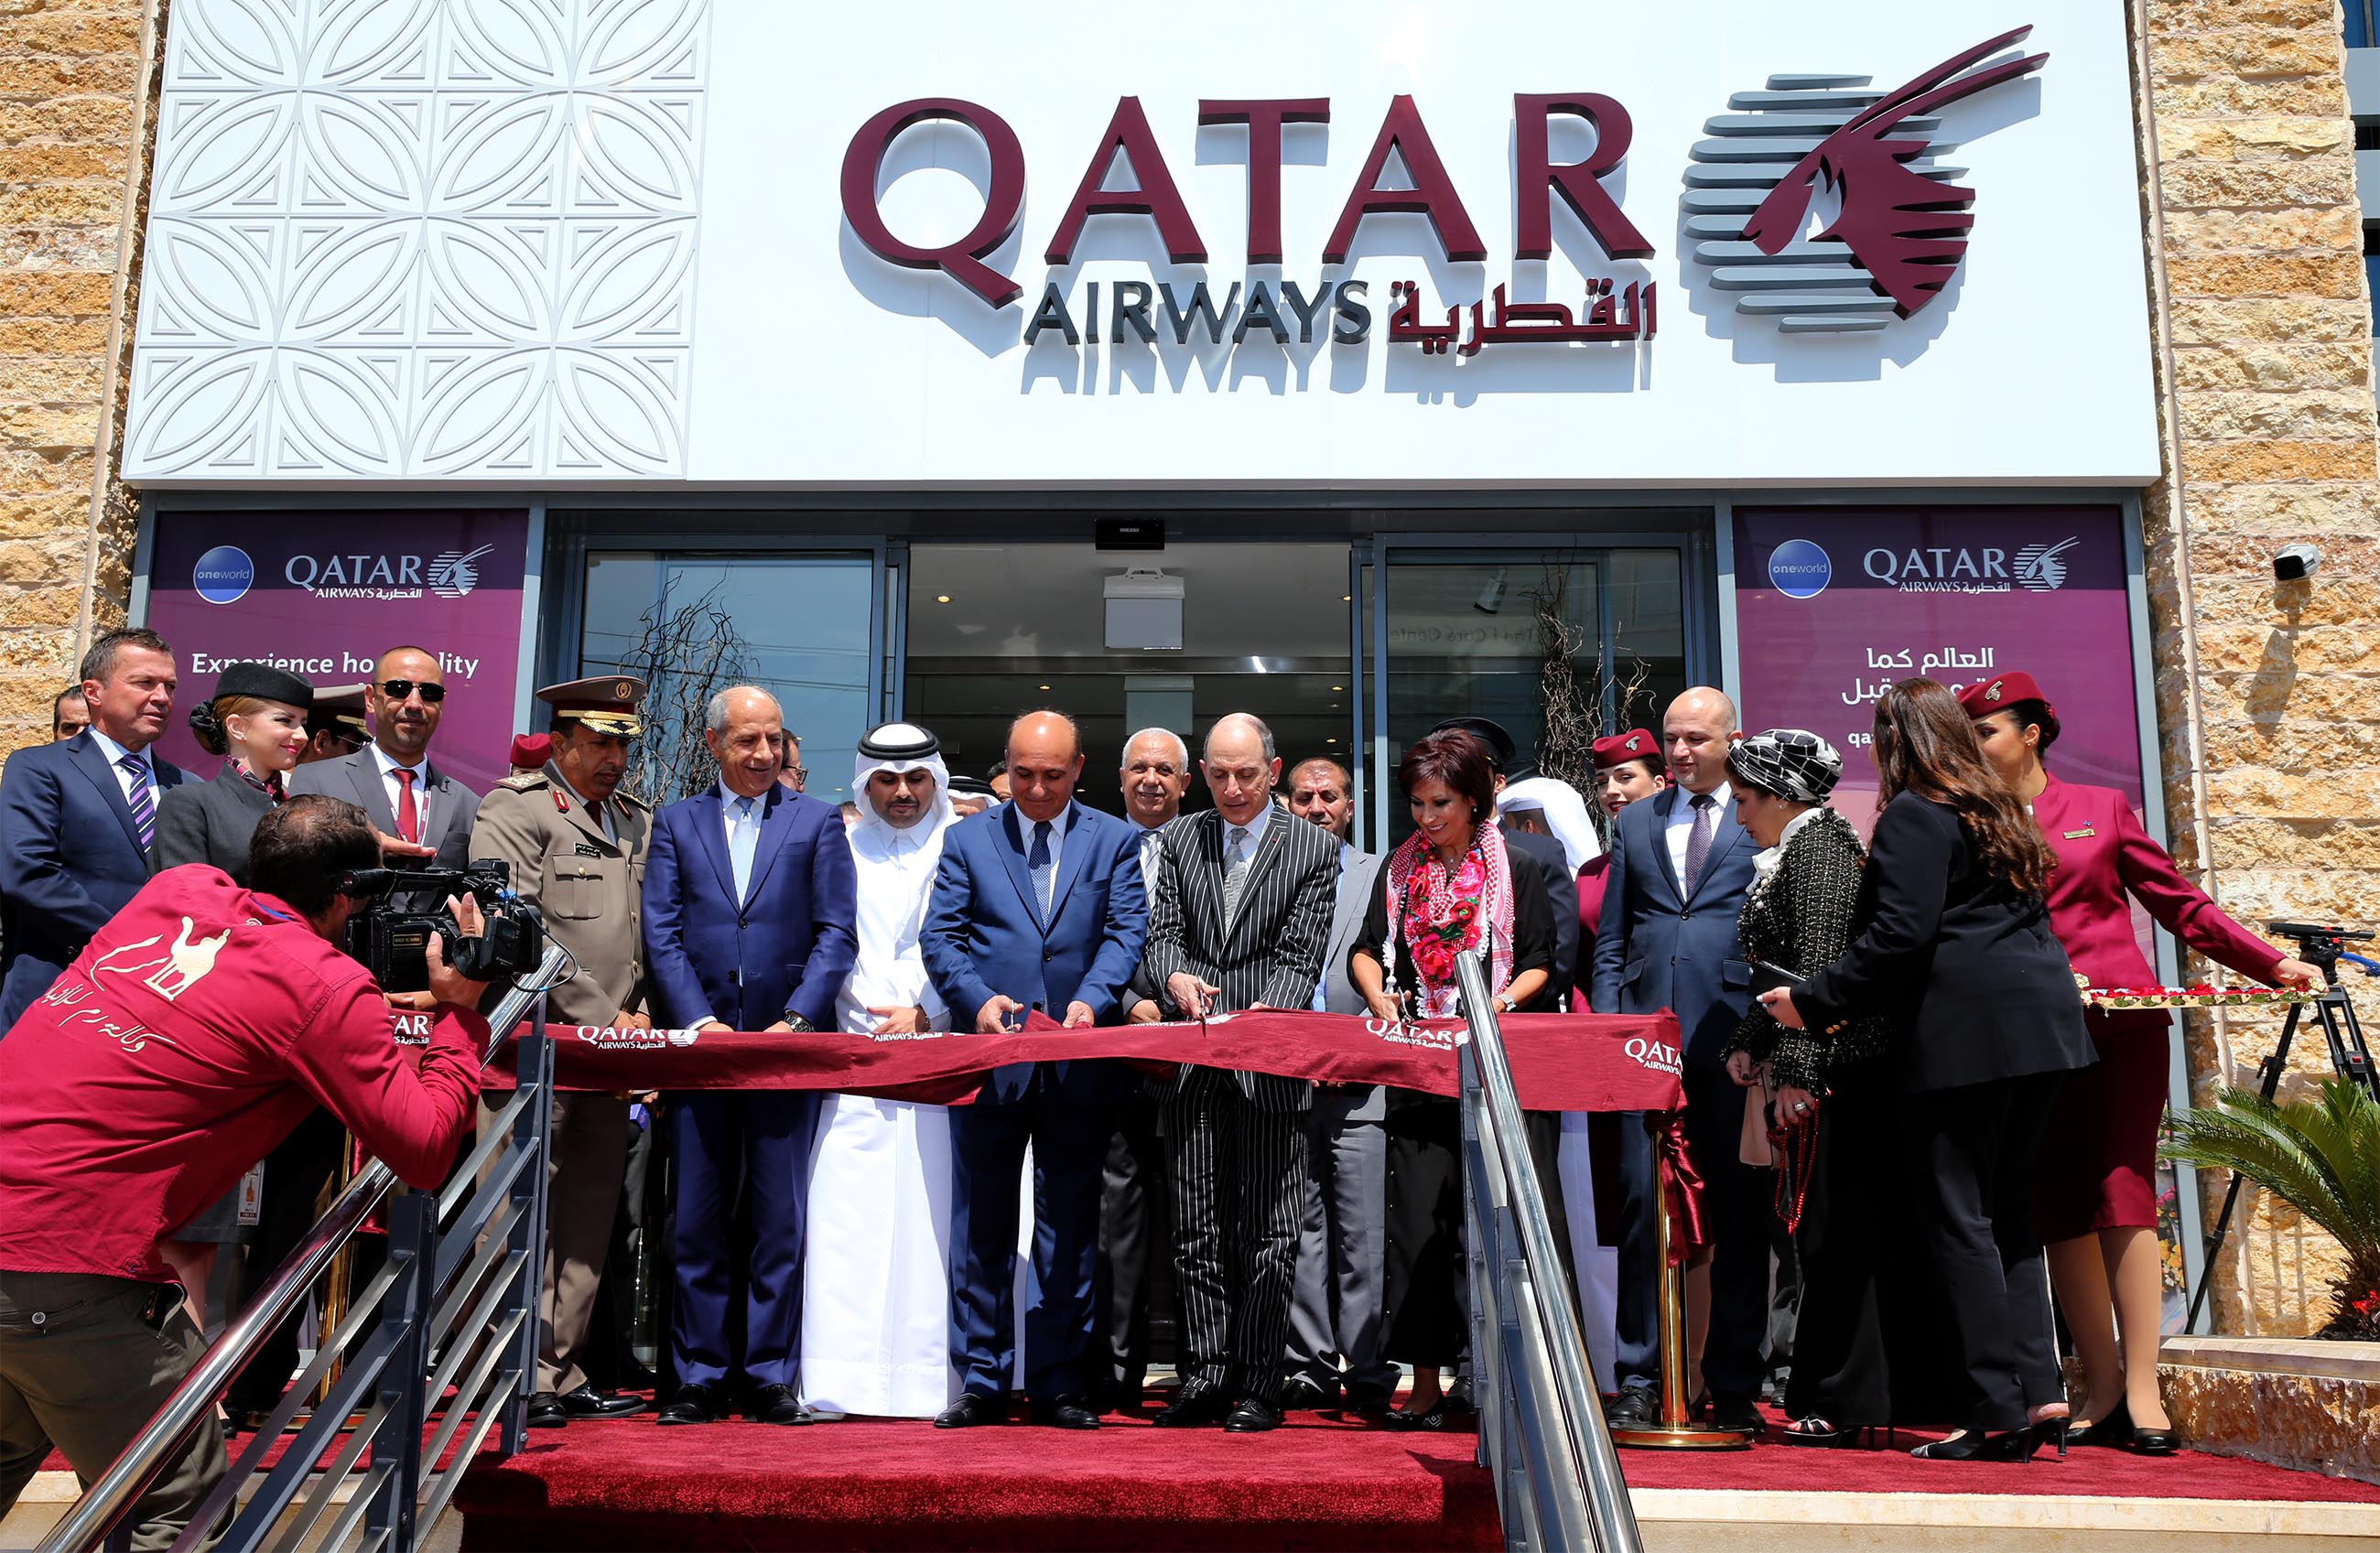 Qatar Airways has opened an office in Amman, Jordan. The building, which has  six floors, is located in Amman’s Shmeisani district, widely considered the principal financial and business district of the capital city. In addition to the airline’s offices, the property offers for rent 24 offices and showrooms, with underground parking, 24/7 security, and on-site management services. The building spans nearly 2,000 square metres of land and over 11,000 square metres of built up area. Click to enlarge.